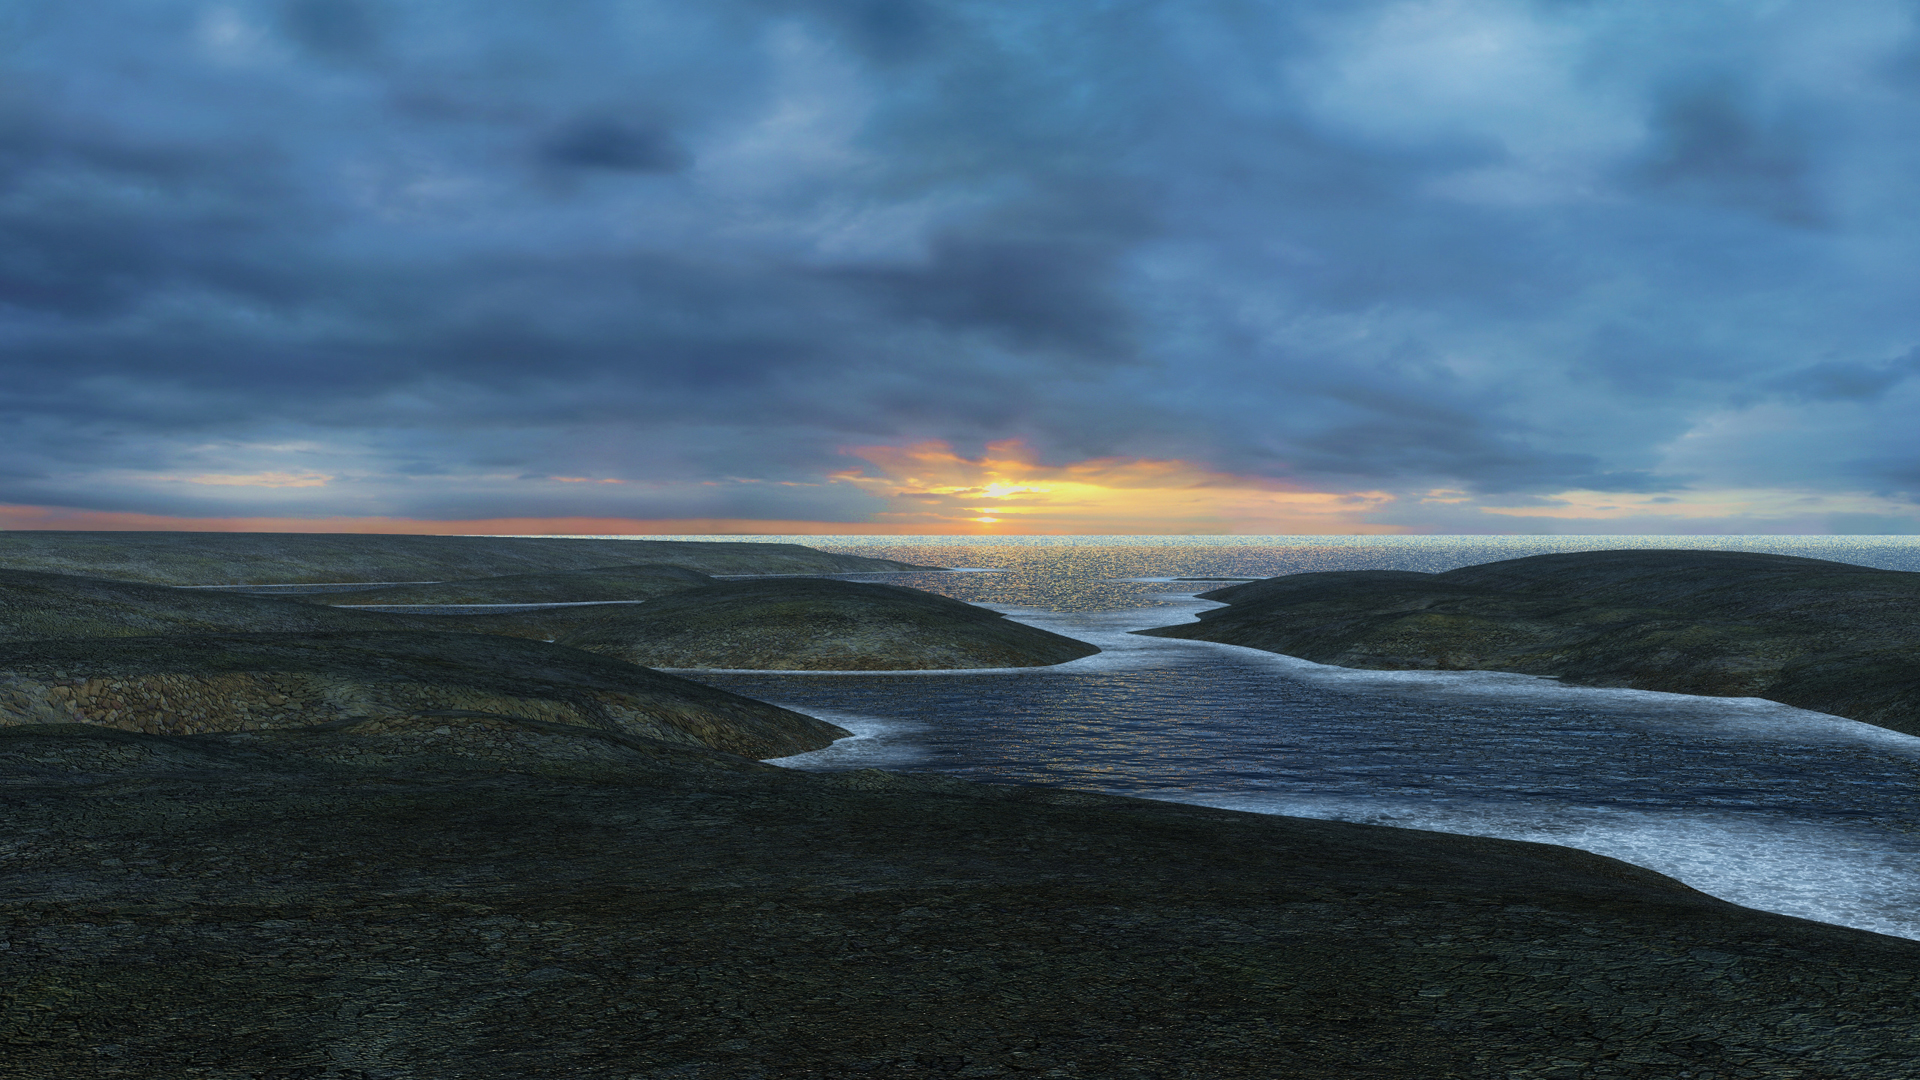 Stunning sunset over a wilderness river with a peaceful ocean shoreline covered in clouds.